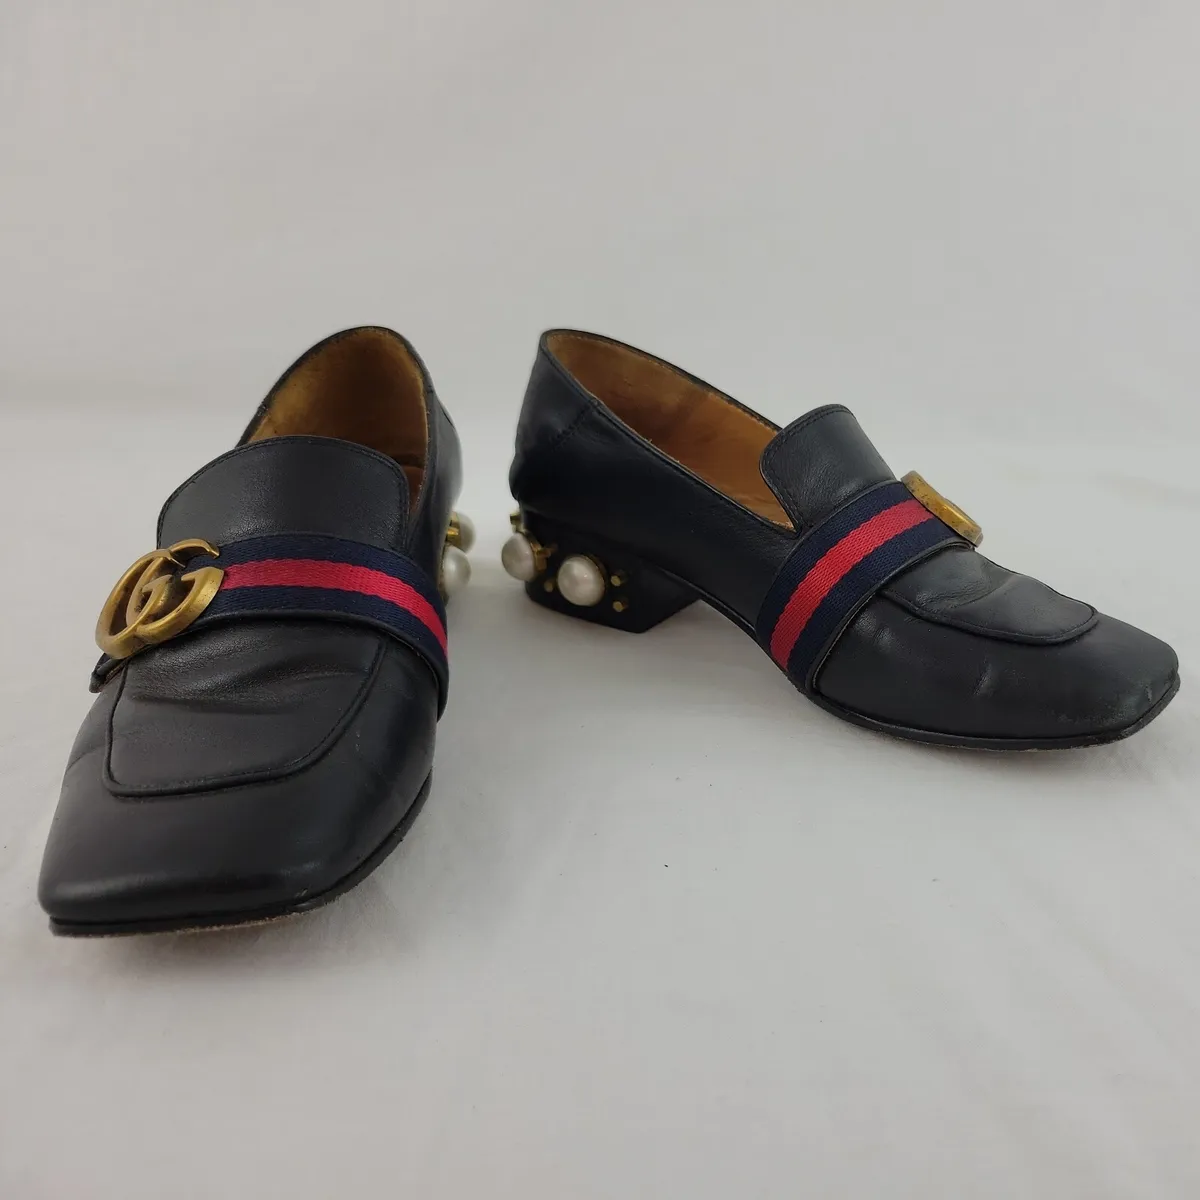 Gucci Black Leather Shoes Womens 7 37 Peyton Mid Heel Loafer Pearl  Embellished